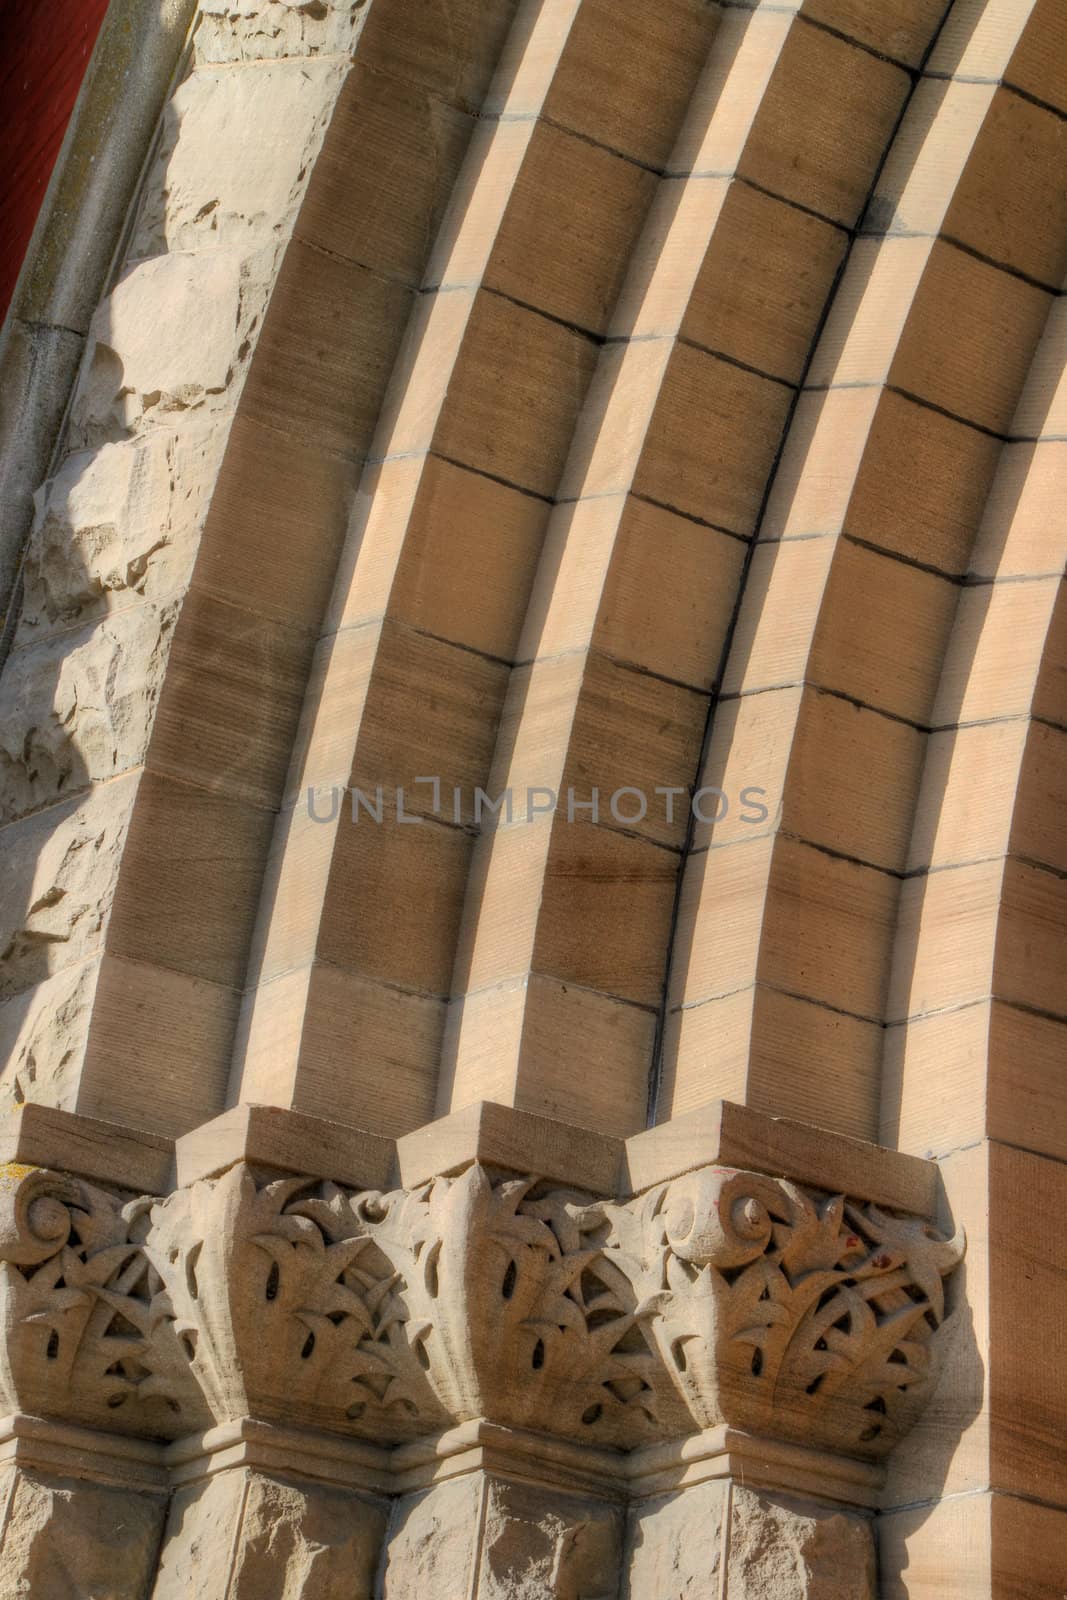 Abstract HDR image of part of the arched bricks of a building entrance